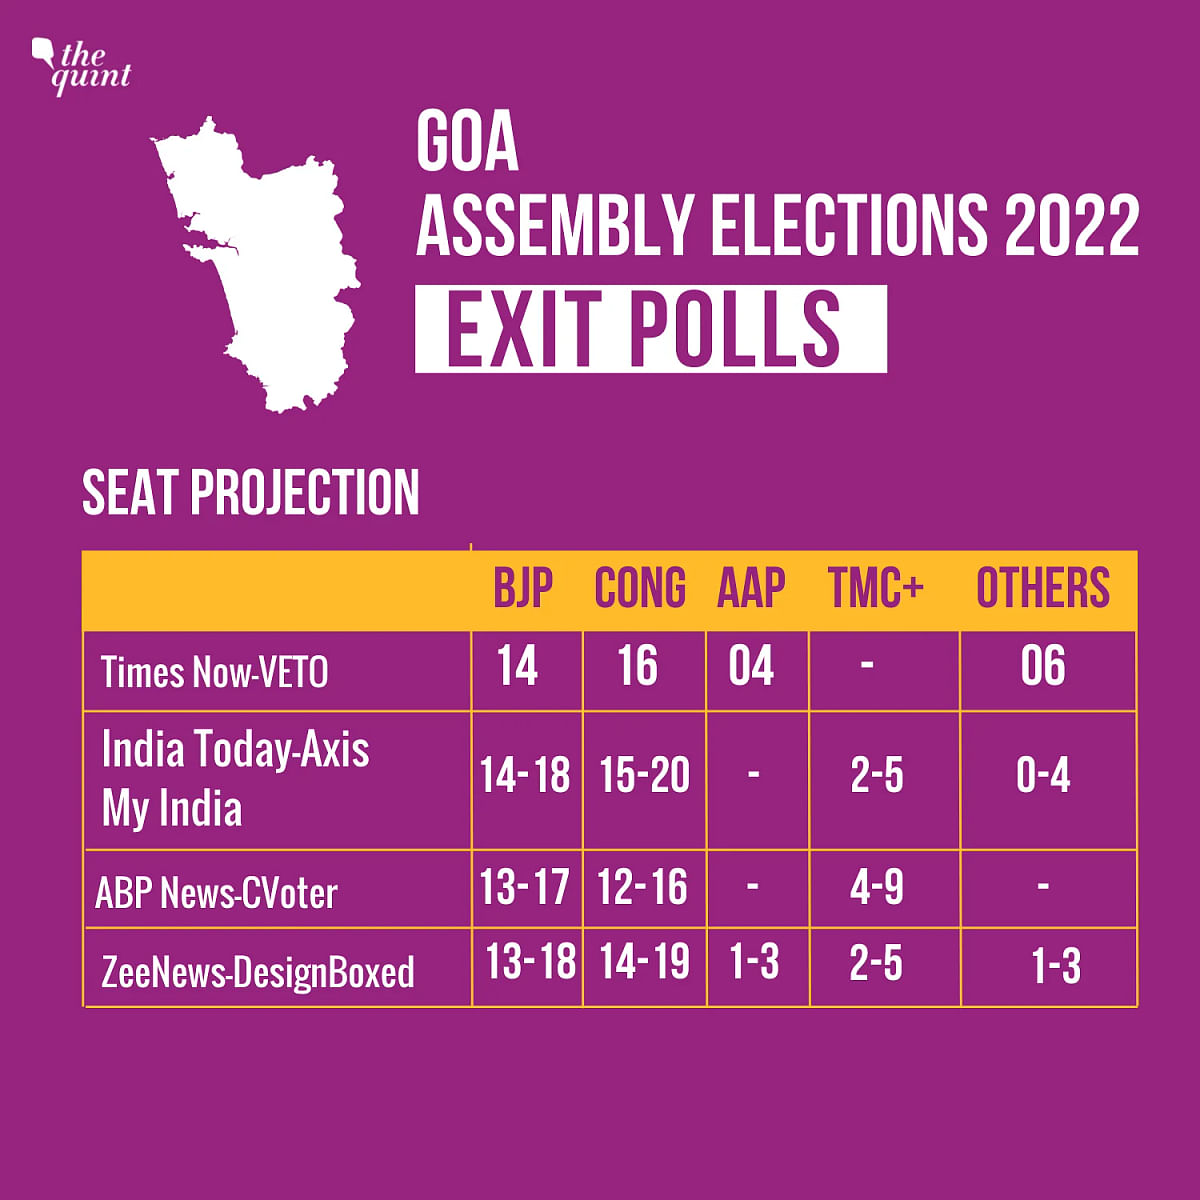 Let's take a look at how close the exit polls came to the actual results. Here is what the exit polls had predicted.